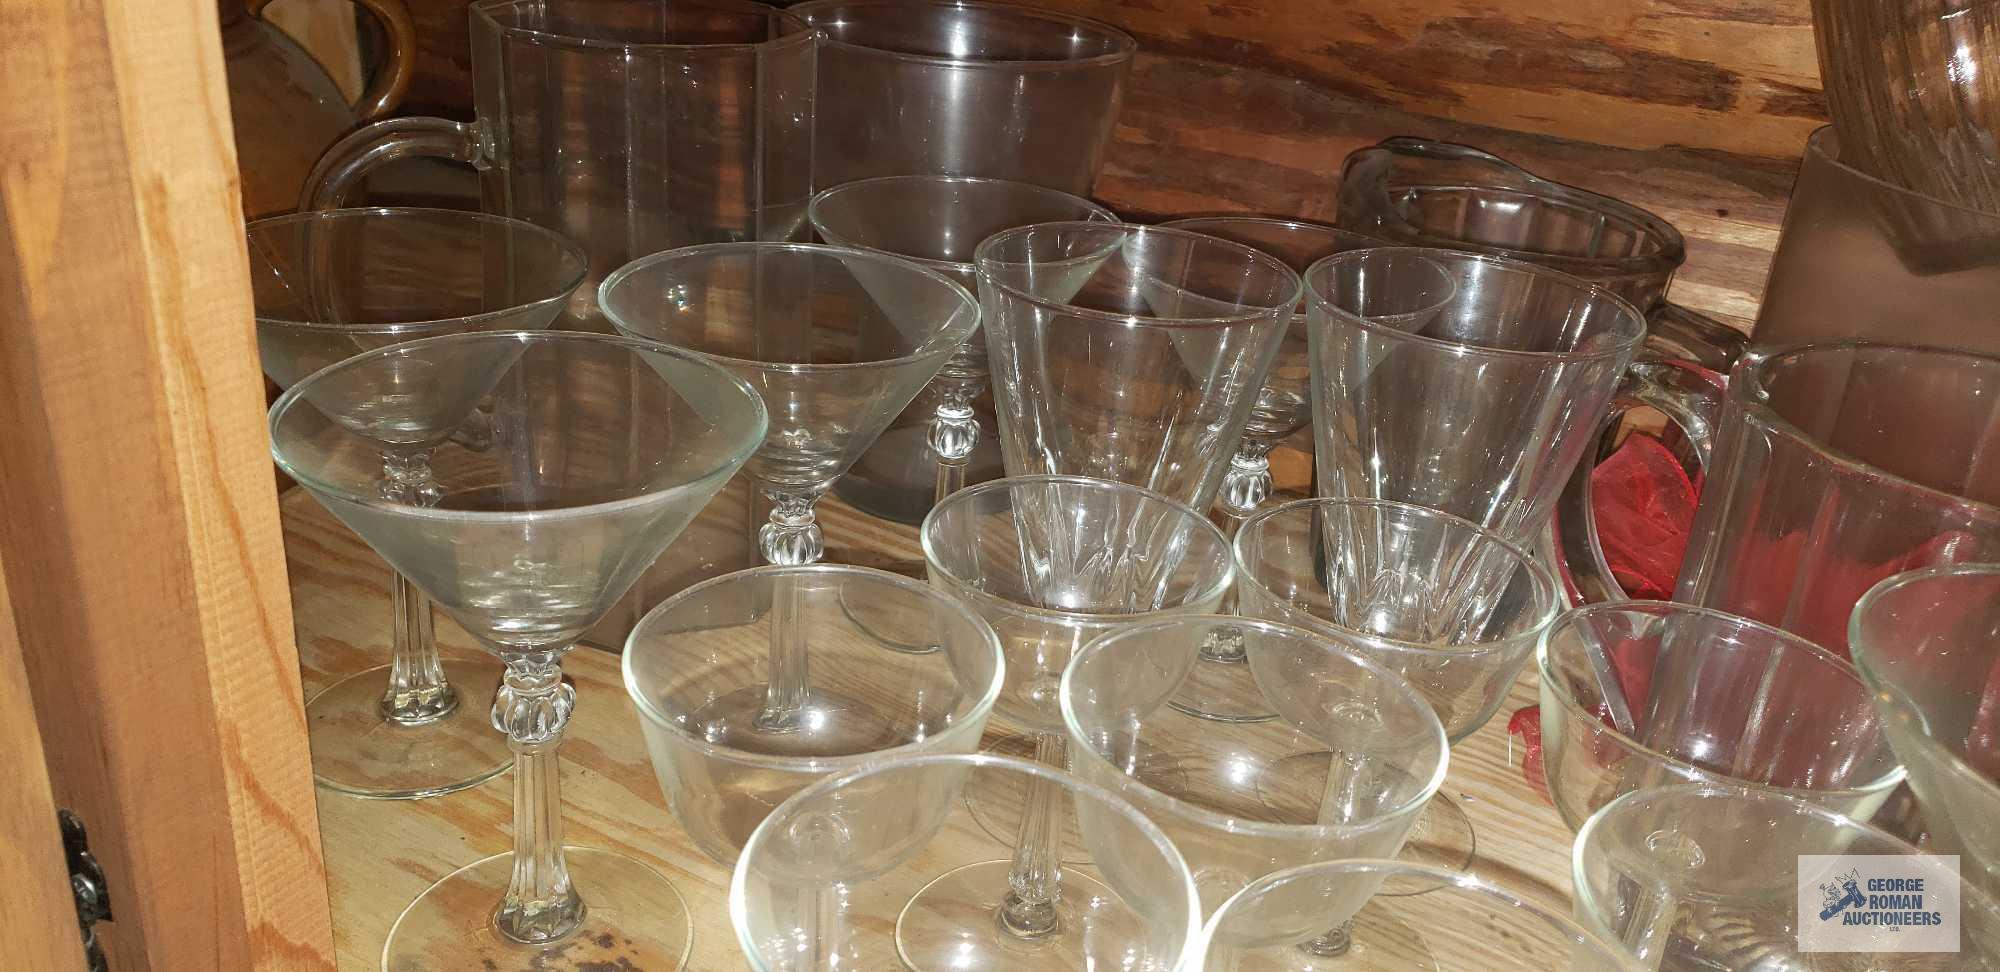 Glass pitchers, stemware, and vases